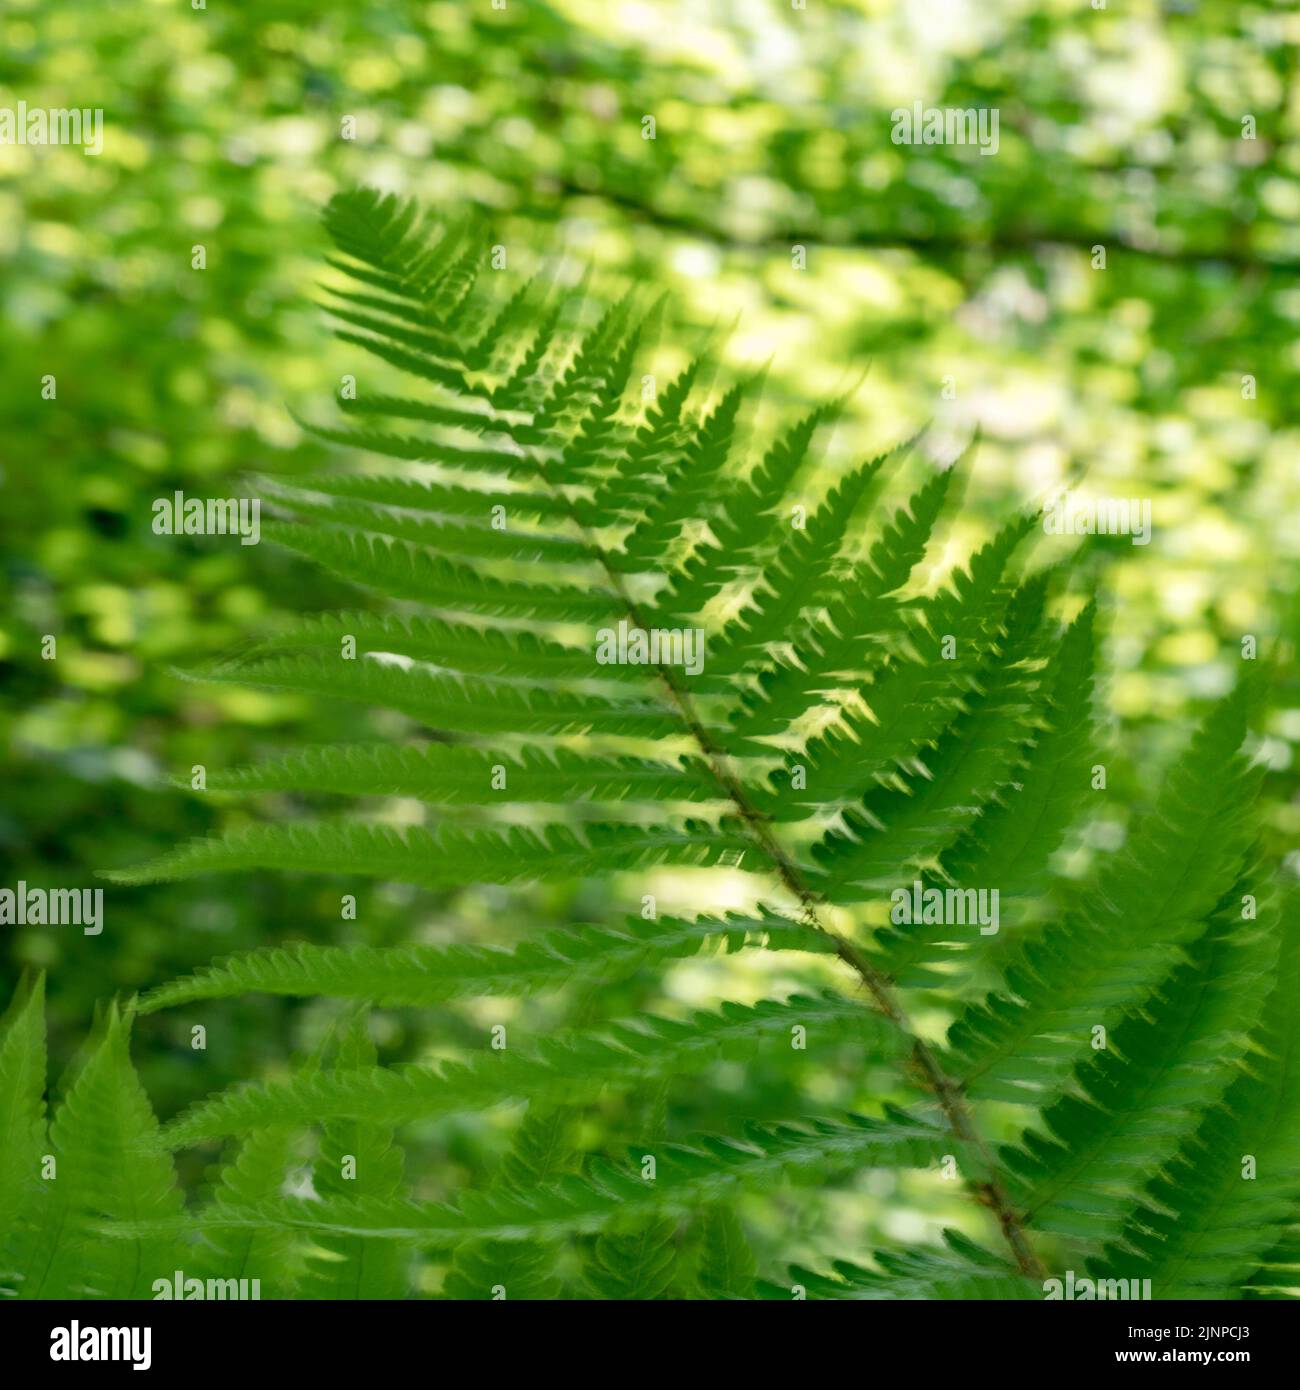 Trembling fern fronds in shaded woodland grove caught with slow shutter speed to give blurry abstract effect. Stock Photo